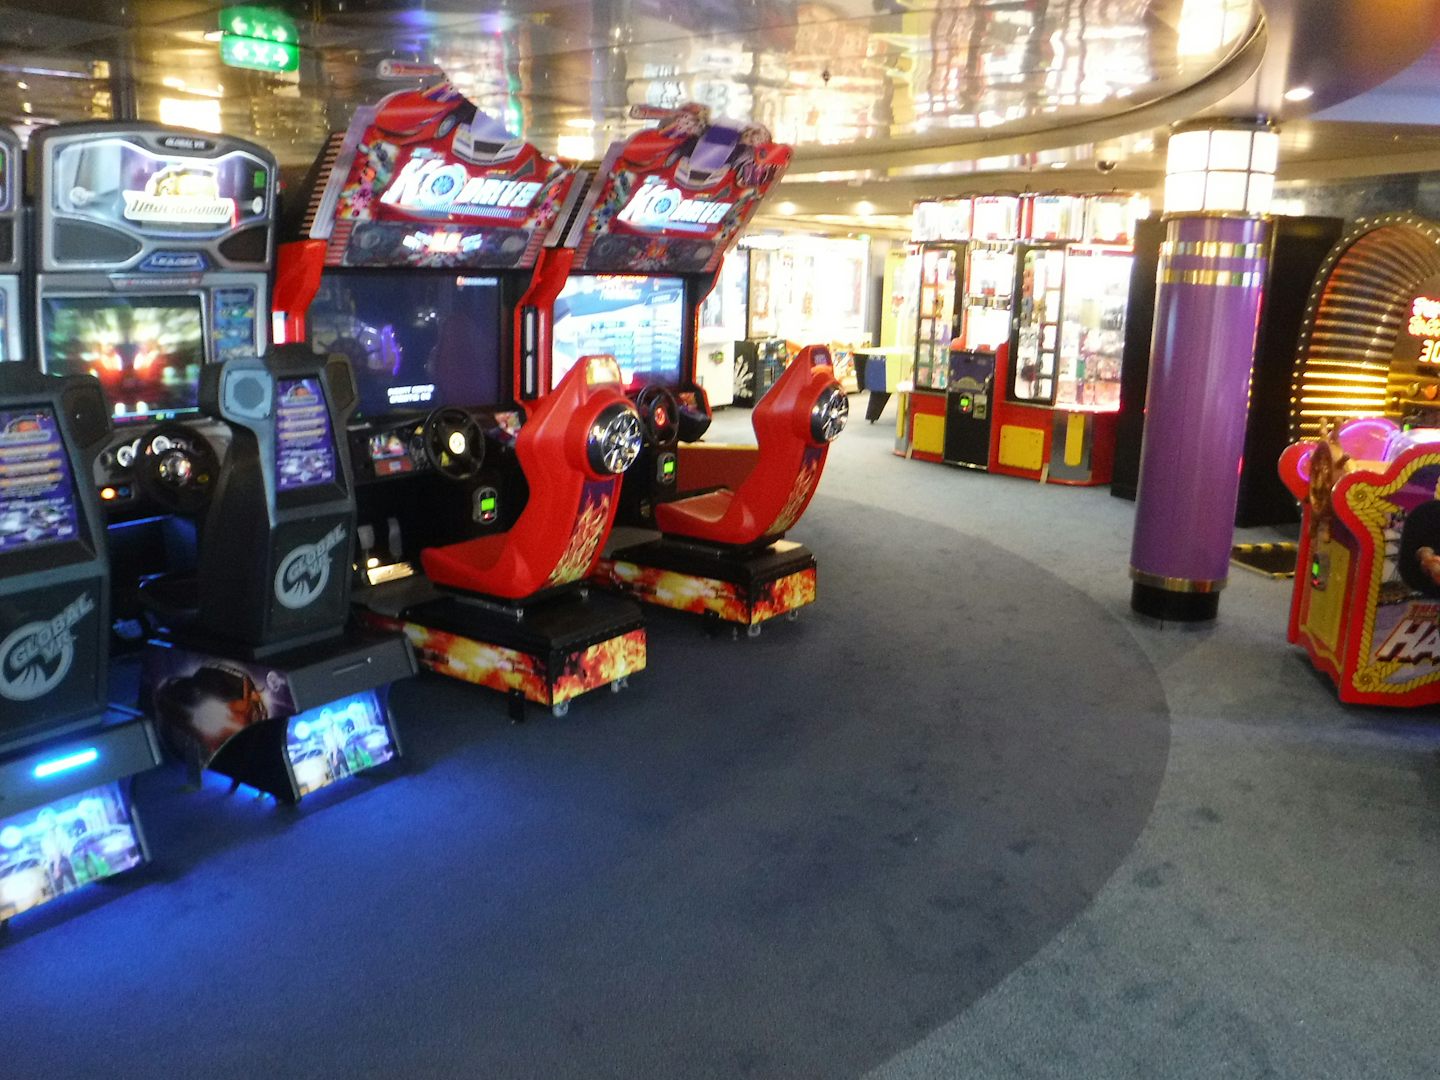 The arcade is very large and has lots of games to play and test your skills